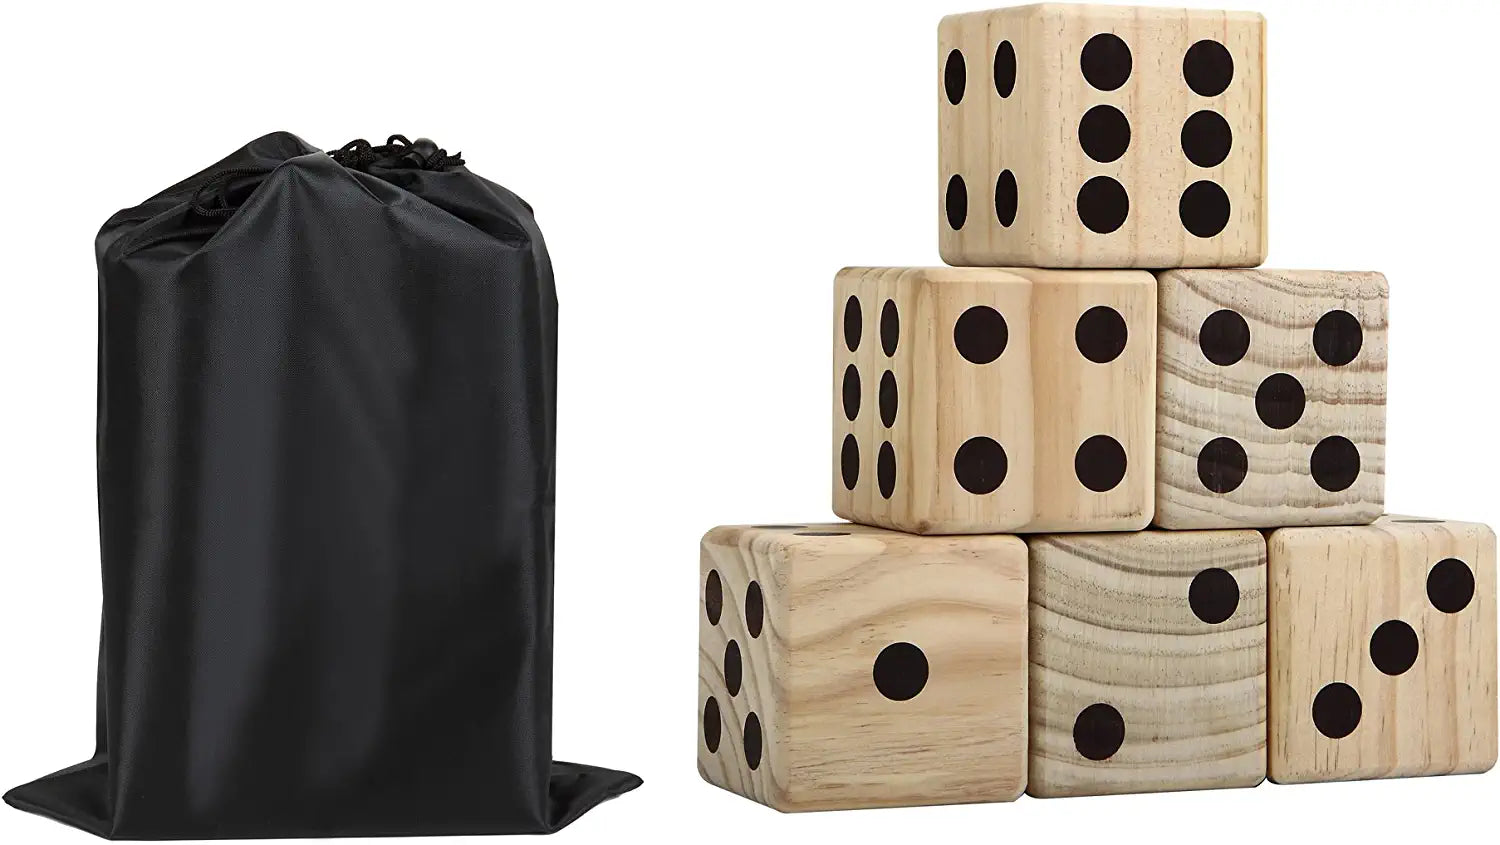 Hathaway High Roller yd Dice Set with 6 x 3.5-in Wooden Dice &amp; Black Nylon Storage Bag, Reusable Scorecard Included yd Dice, Wood